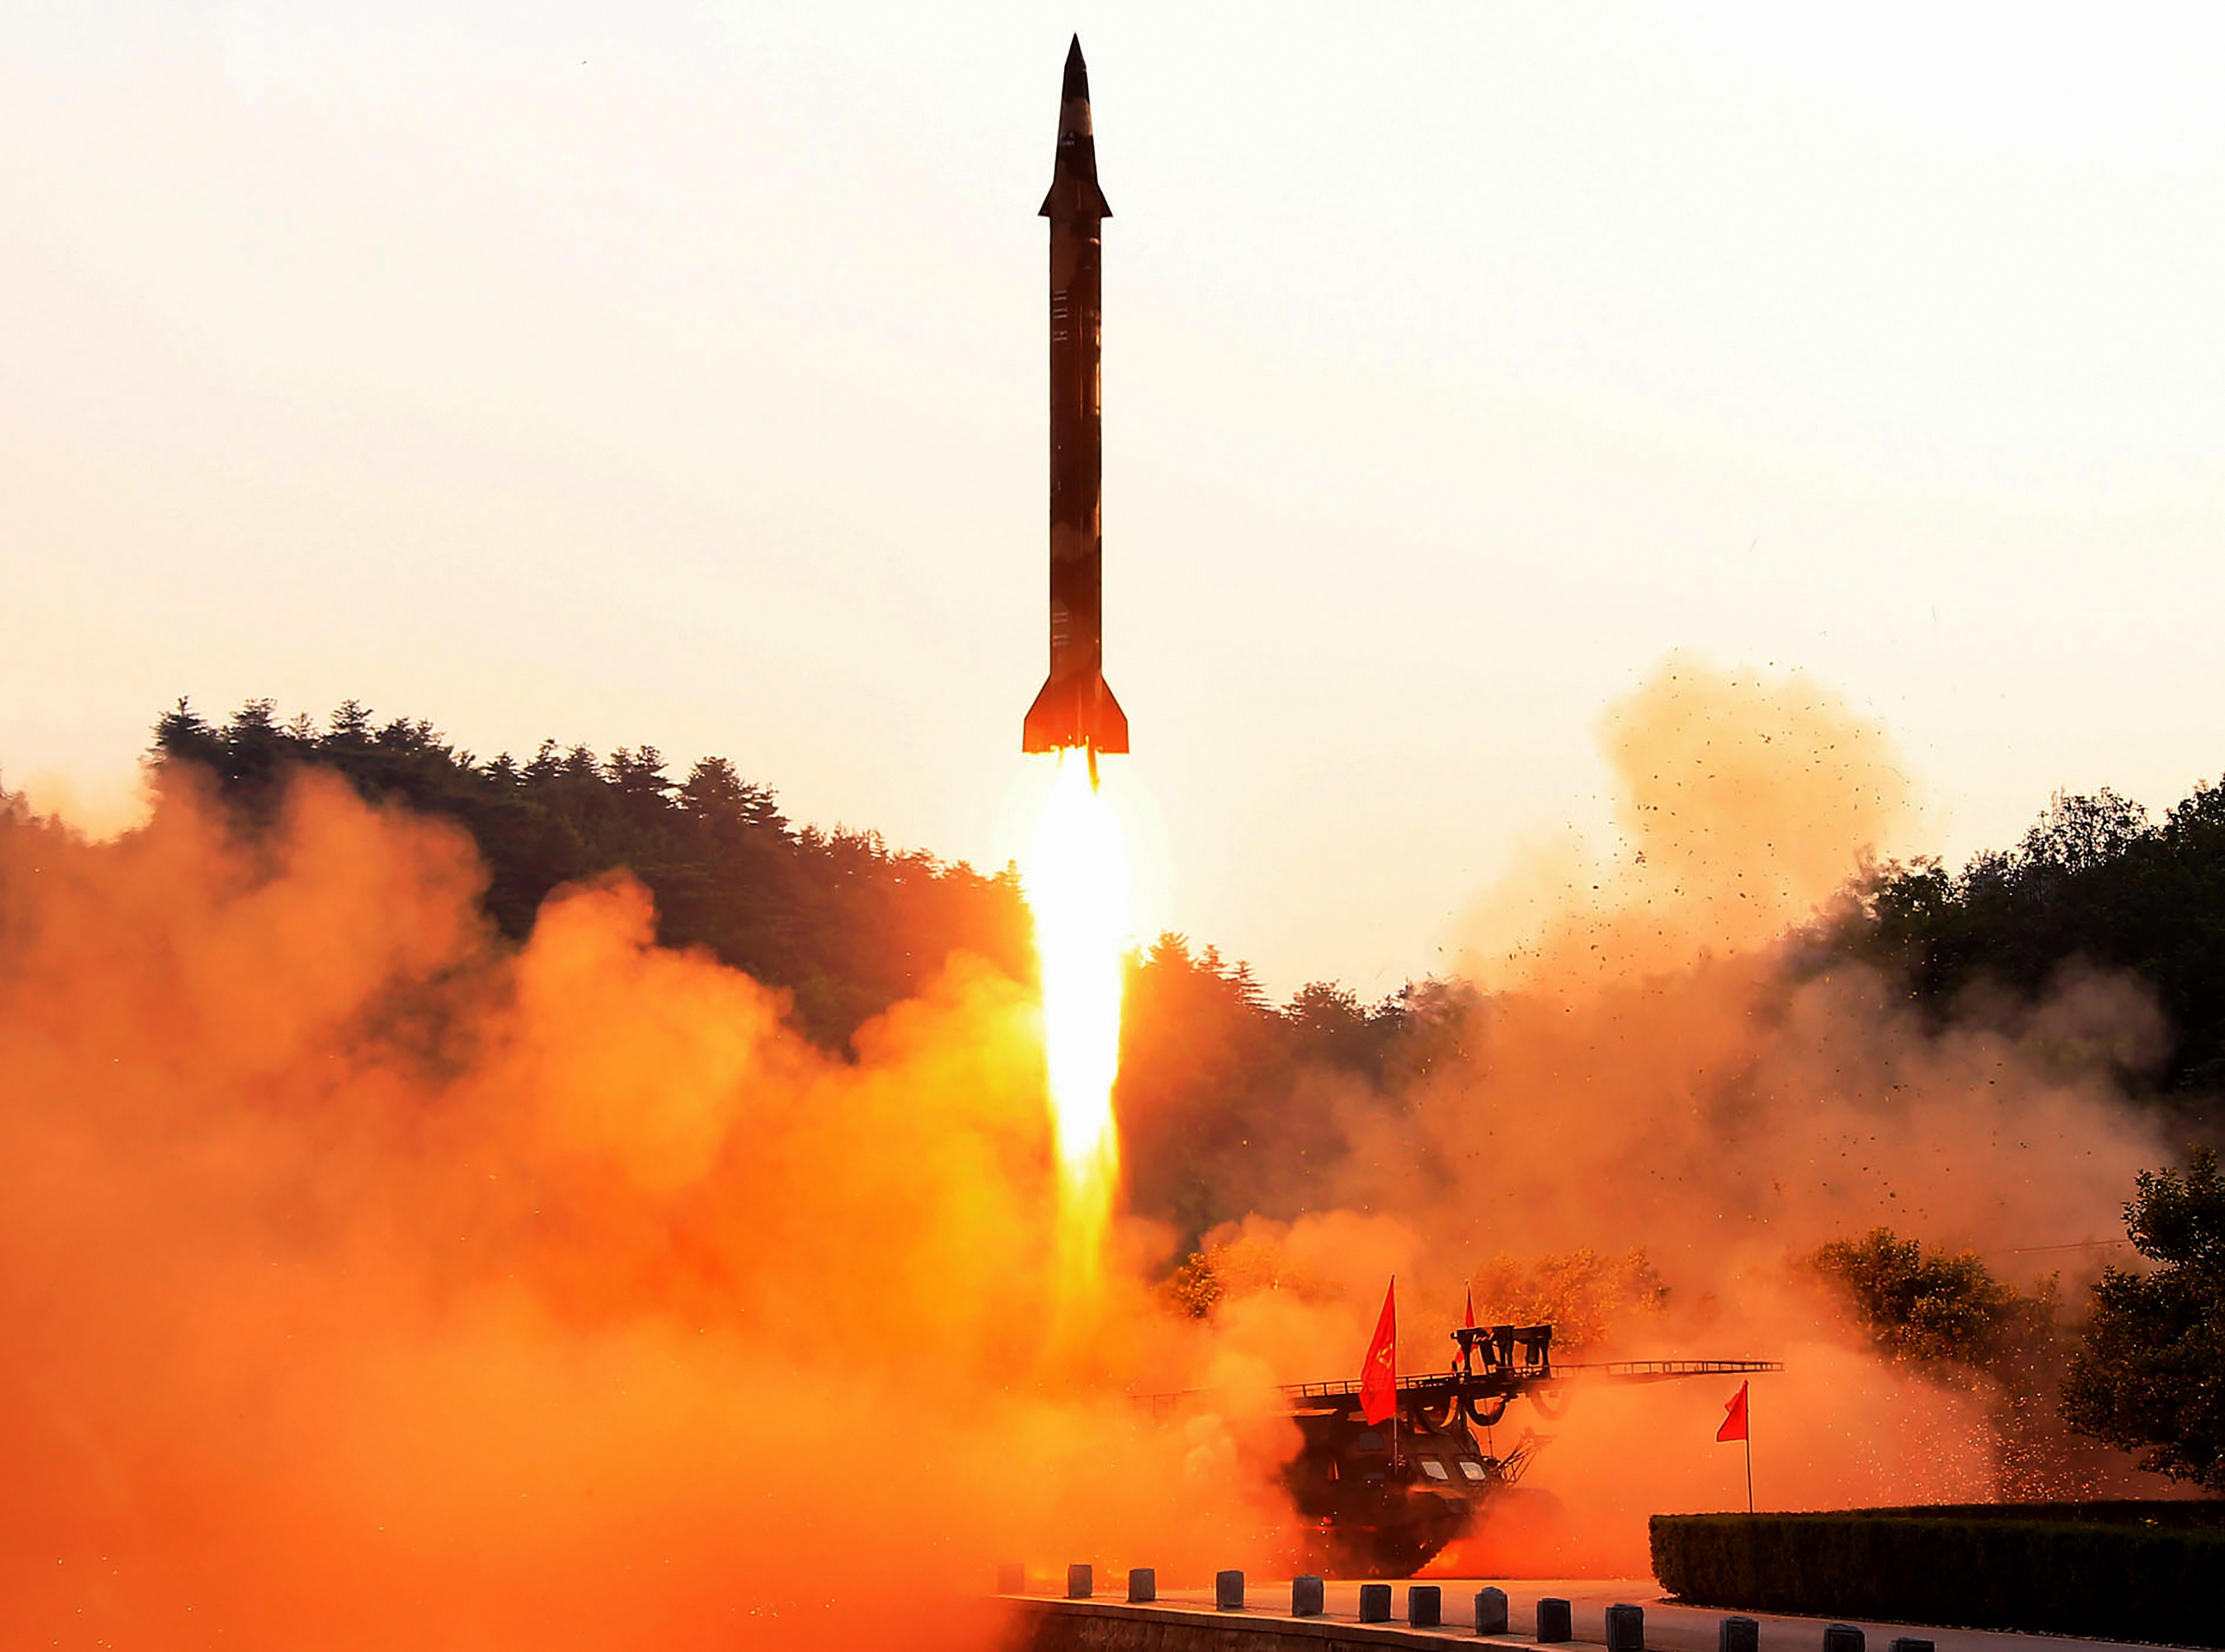 North Korea fired a missile that passed over northern Japan early on Tuesda...